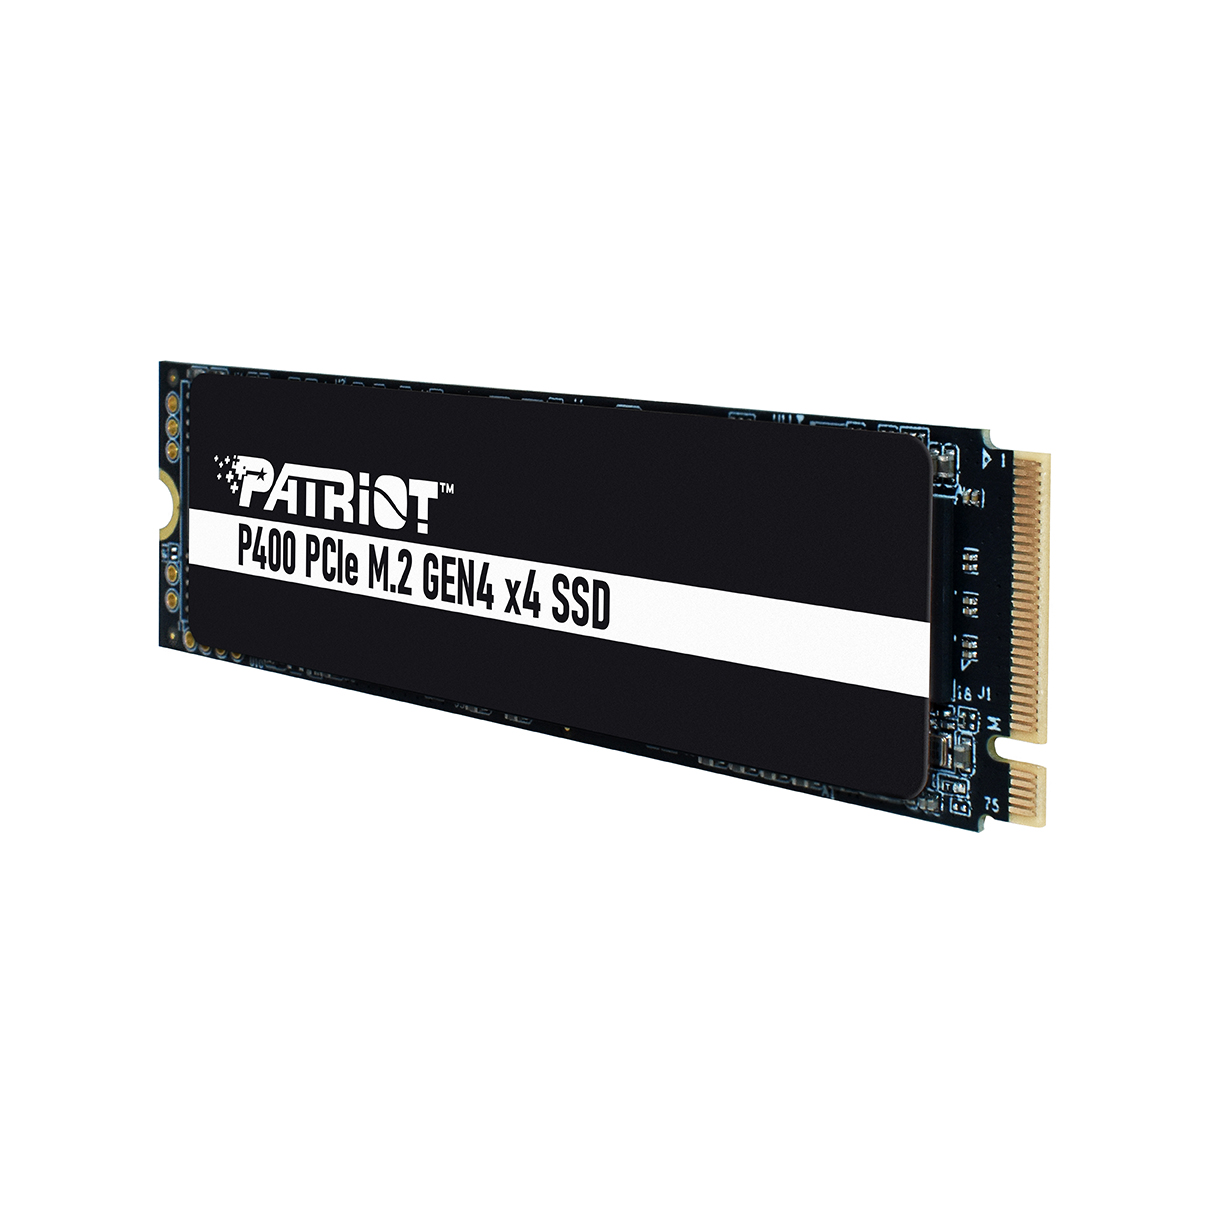 Media asset in full size related to 3dfxzone.it news item entitled as follows: PATRIOT annuncia la linea di drive a stato solido P400 PCIe Gen4x4 NVMe M.2 | Image Name: news32890_Patriot-P400-1TB_1.jpg